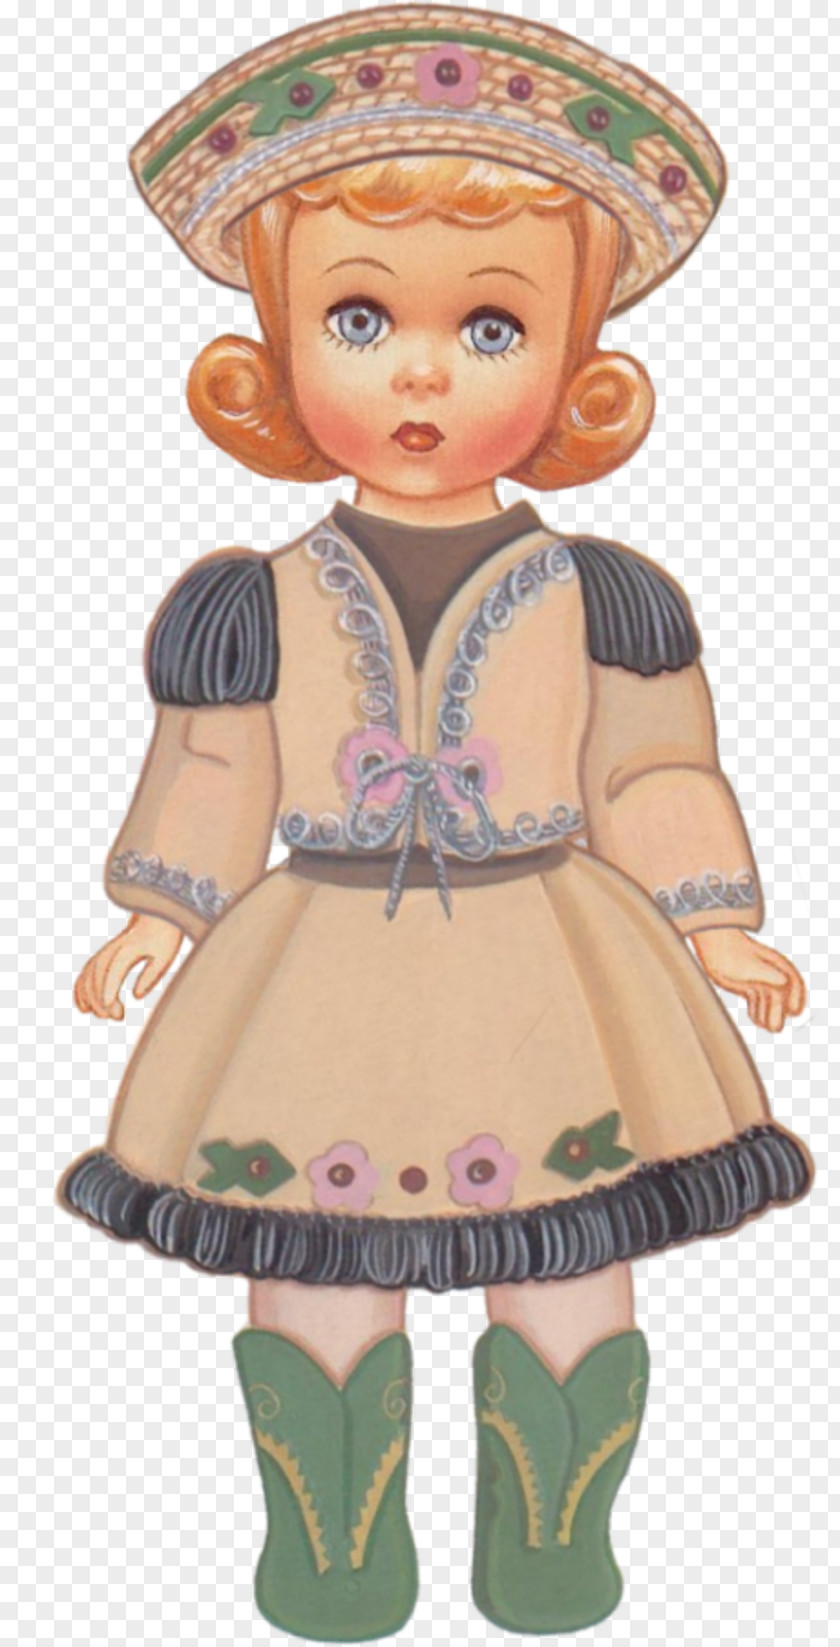 Doll Toddler Figurine PNG